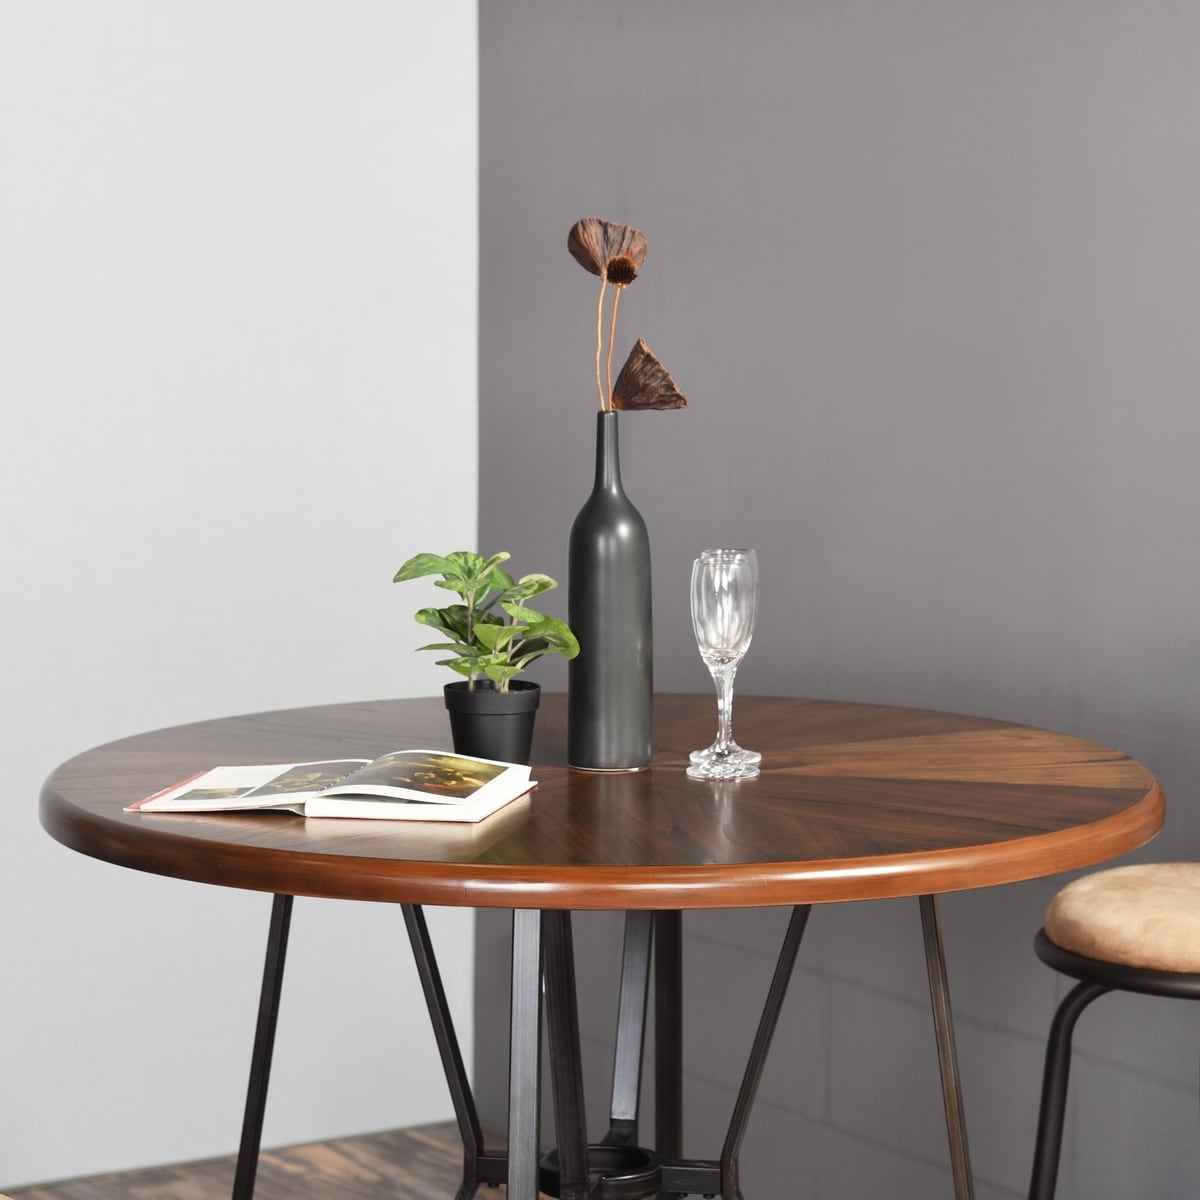 Dining Table FurnitureR Modern Style 80cm Round Kitchen Dining Table with Wood Legs Cream White 